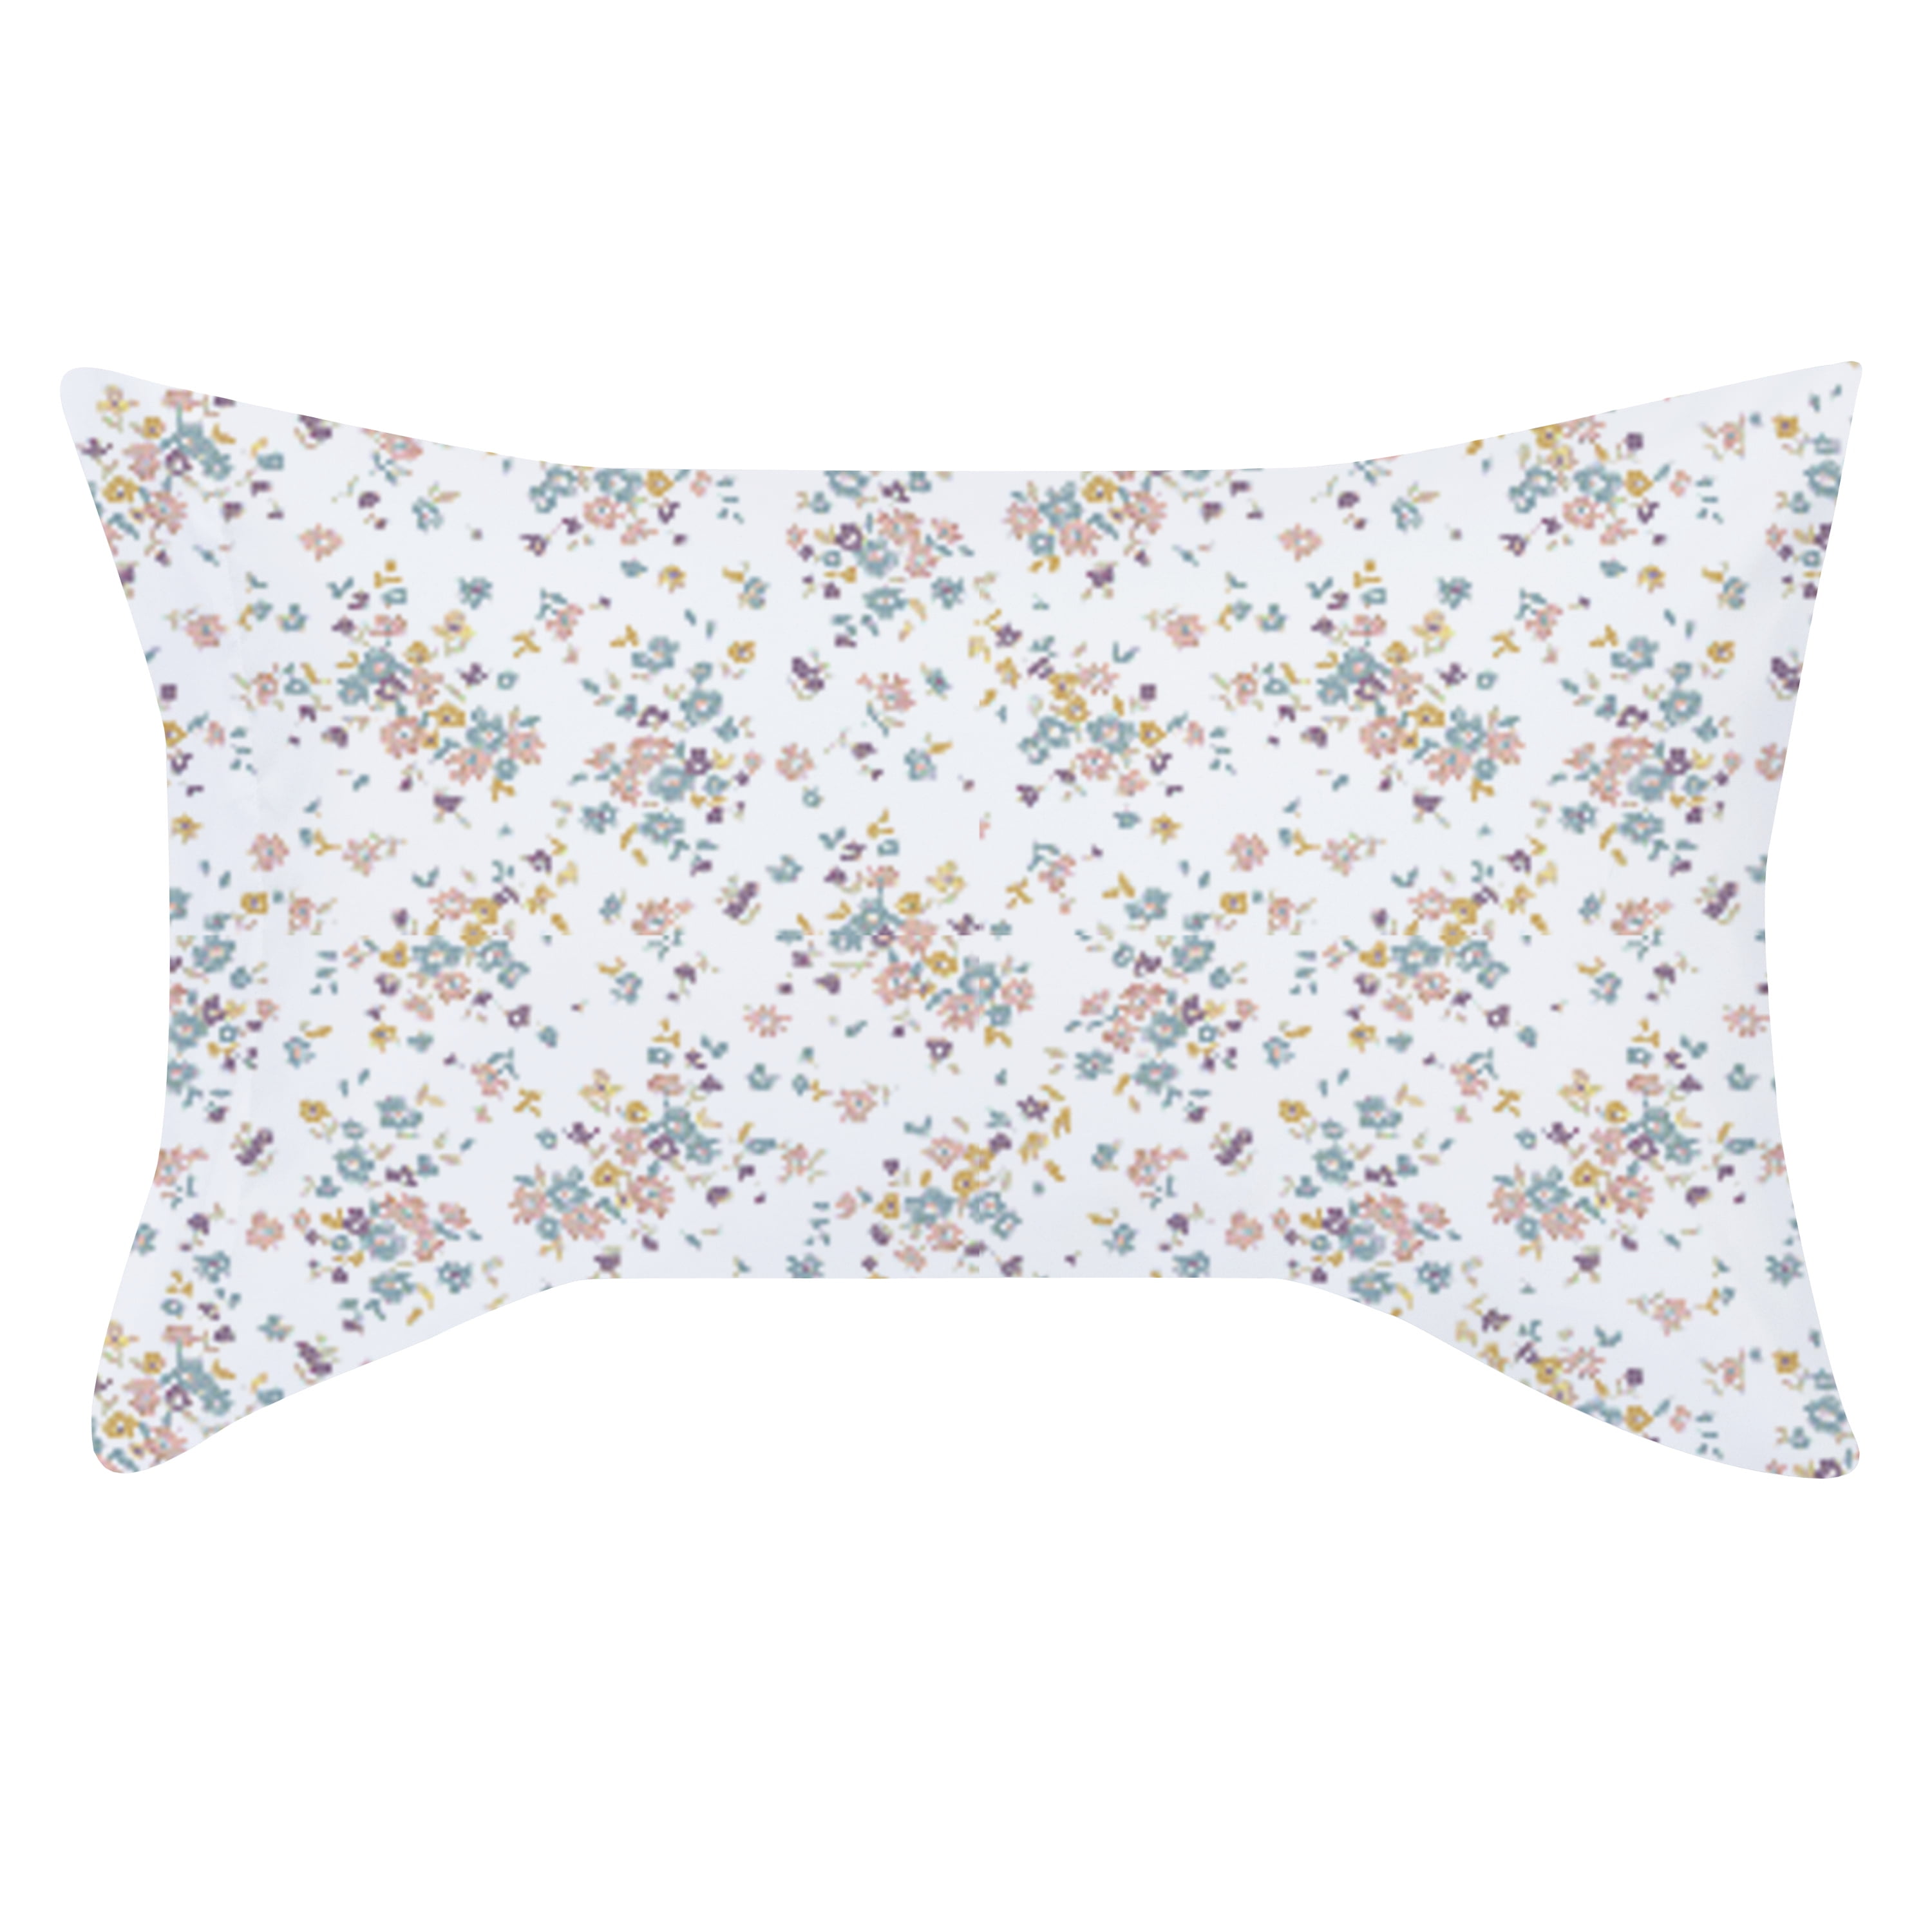 Mainstays Super Soft Recycled Brushed Microfiber Pillowcase Set Stdqueen White Floral 2 6536